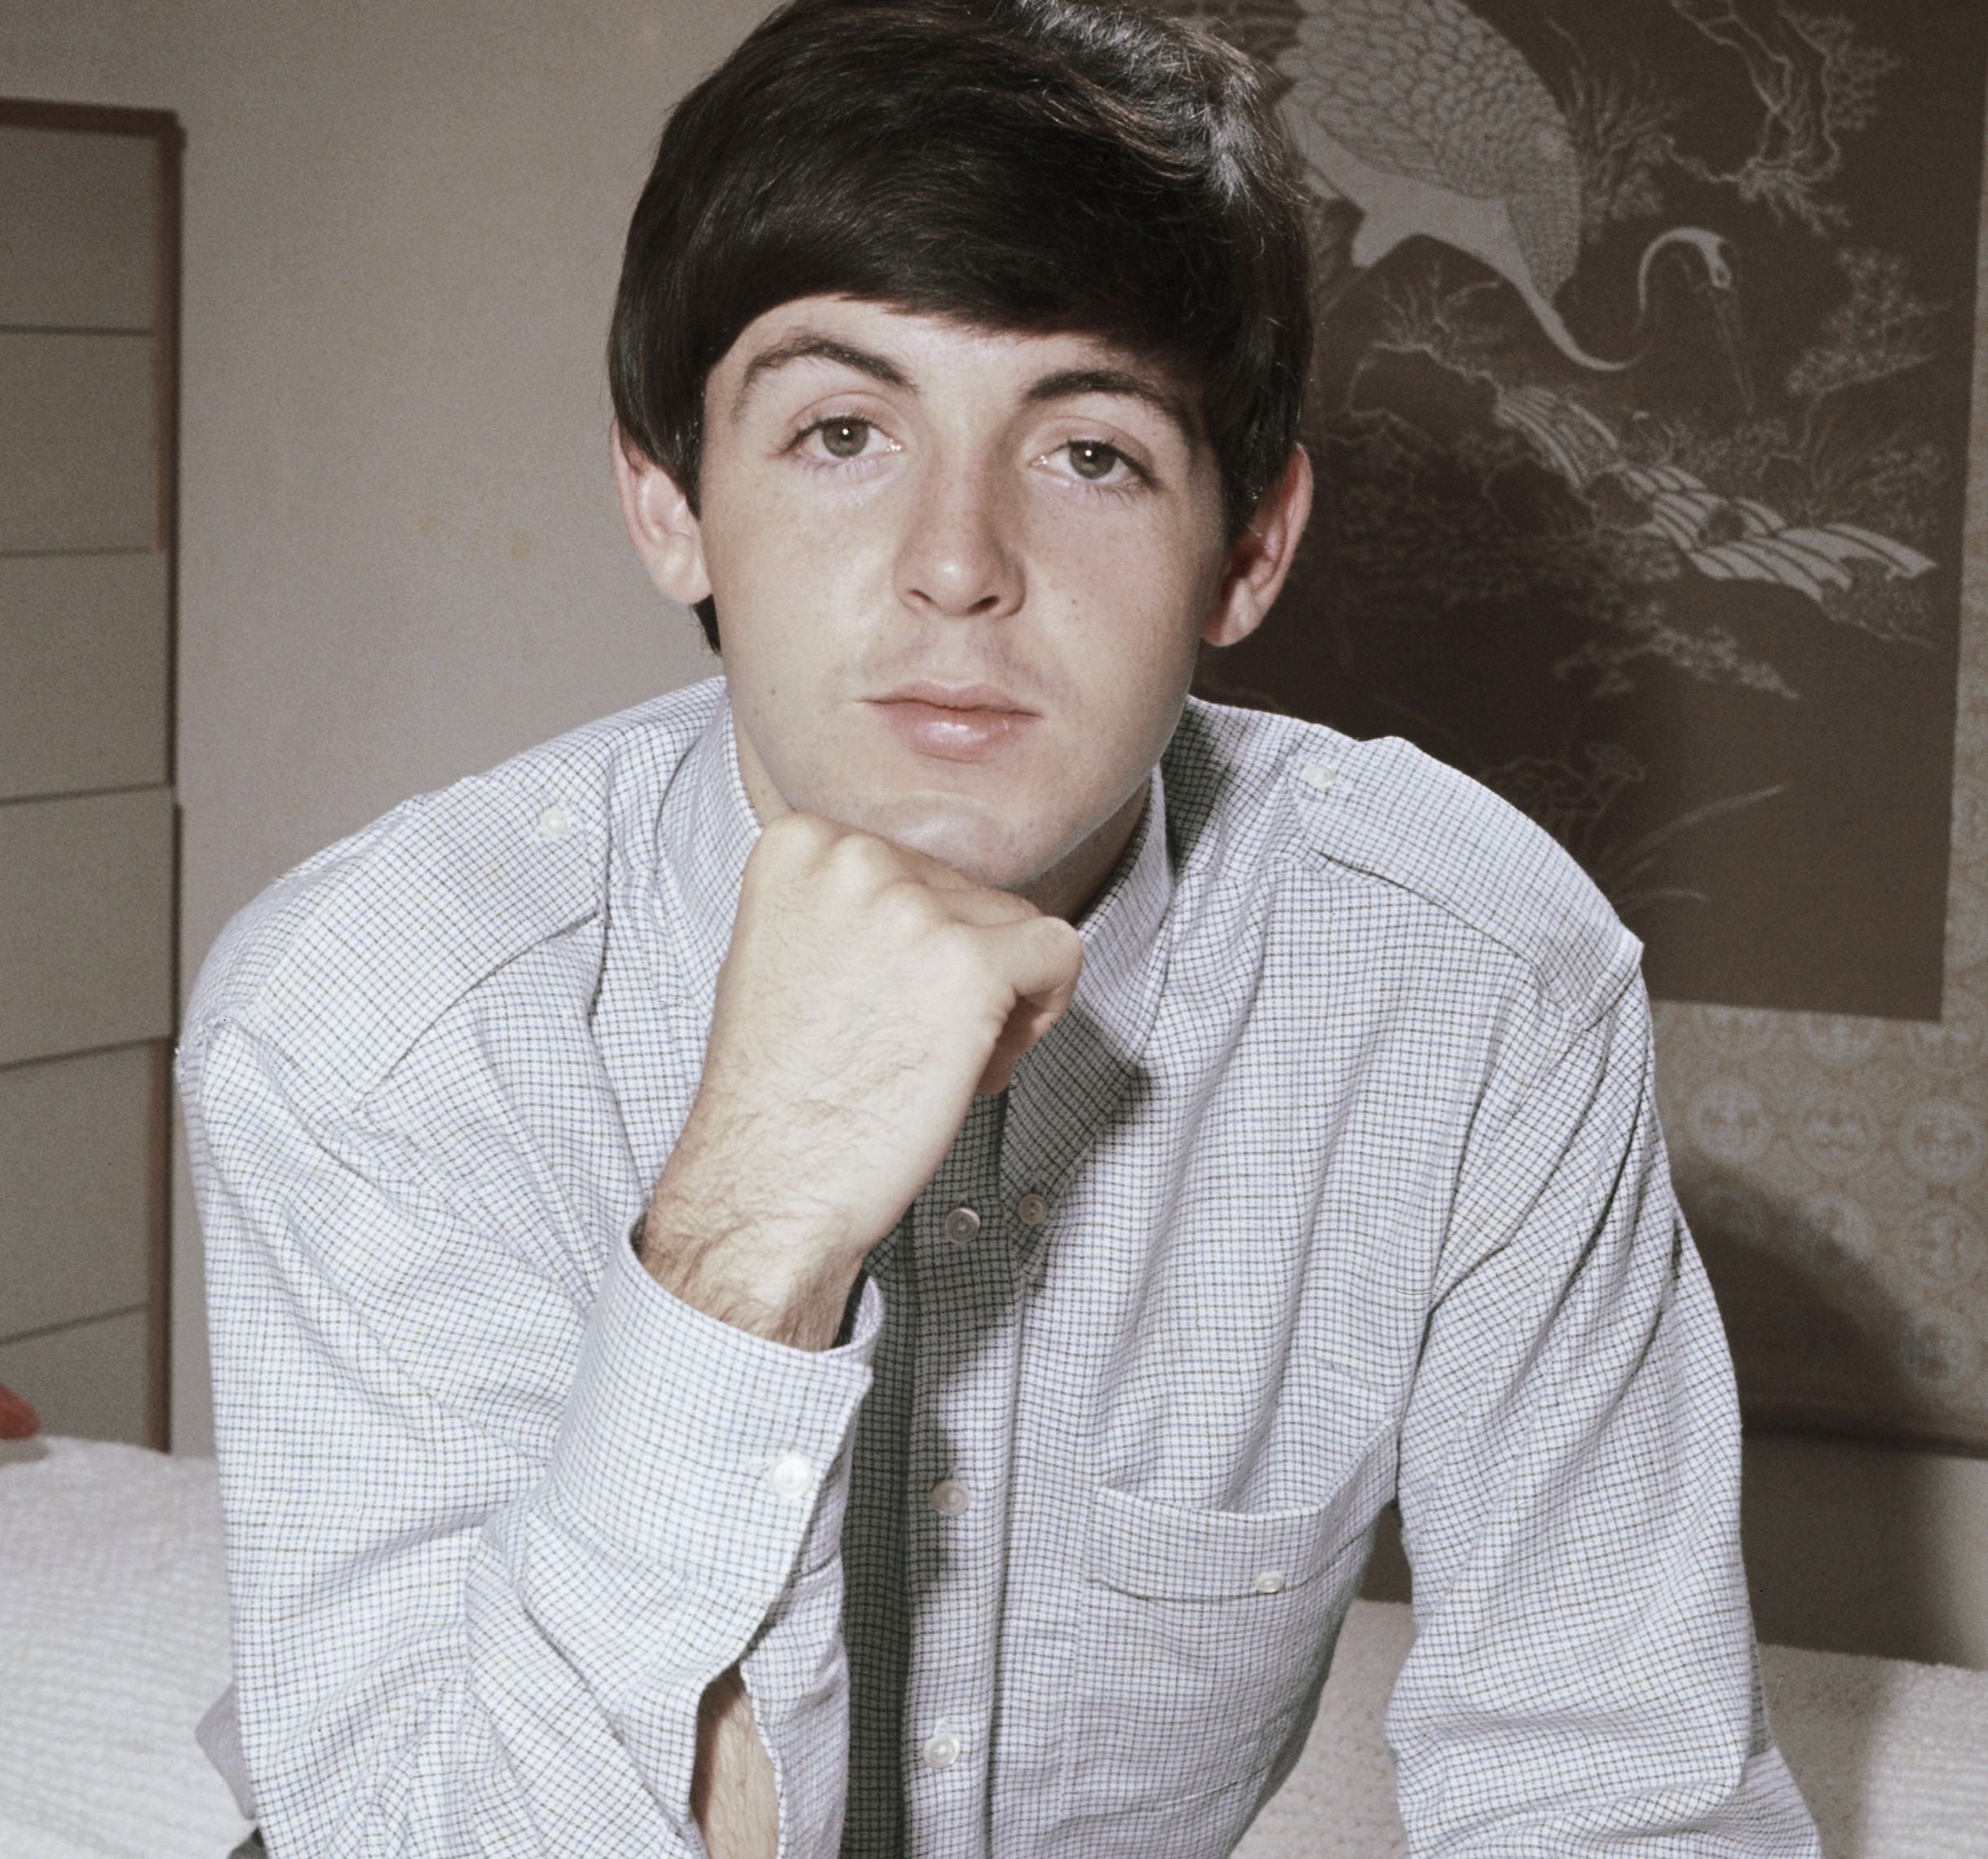 Paul McCartney Couldn’t Listen to The Beatles’ ‘Happiness Is a Warm Gun’ the Same Way Because of John Lennon’s Death